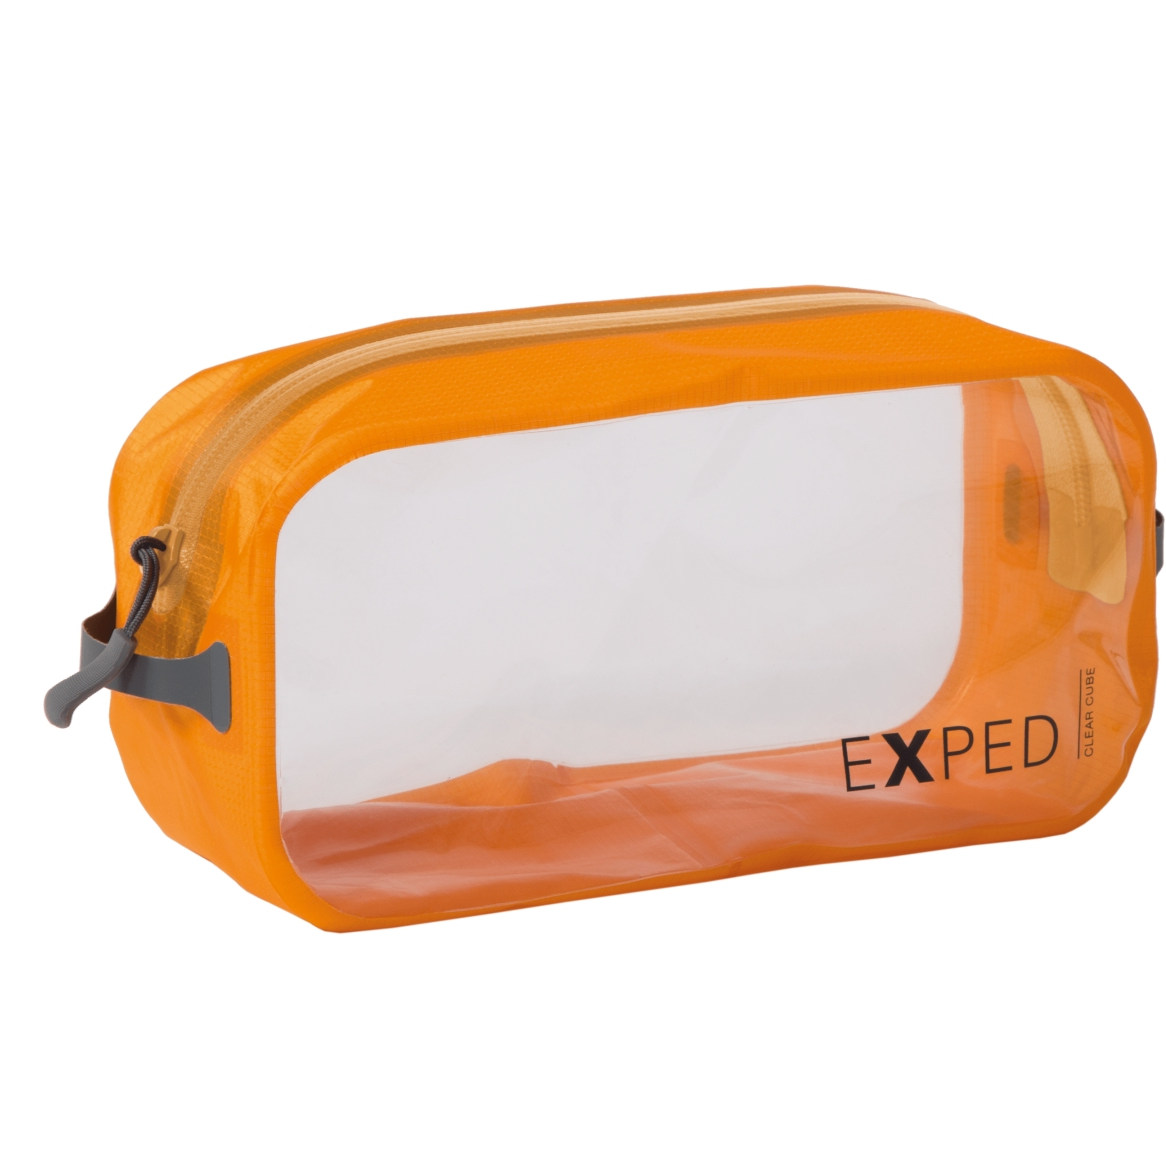 Productfoto van Exped Clear Cube - M - Oranje